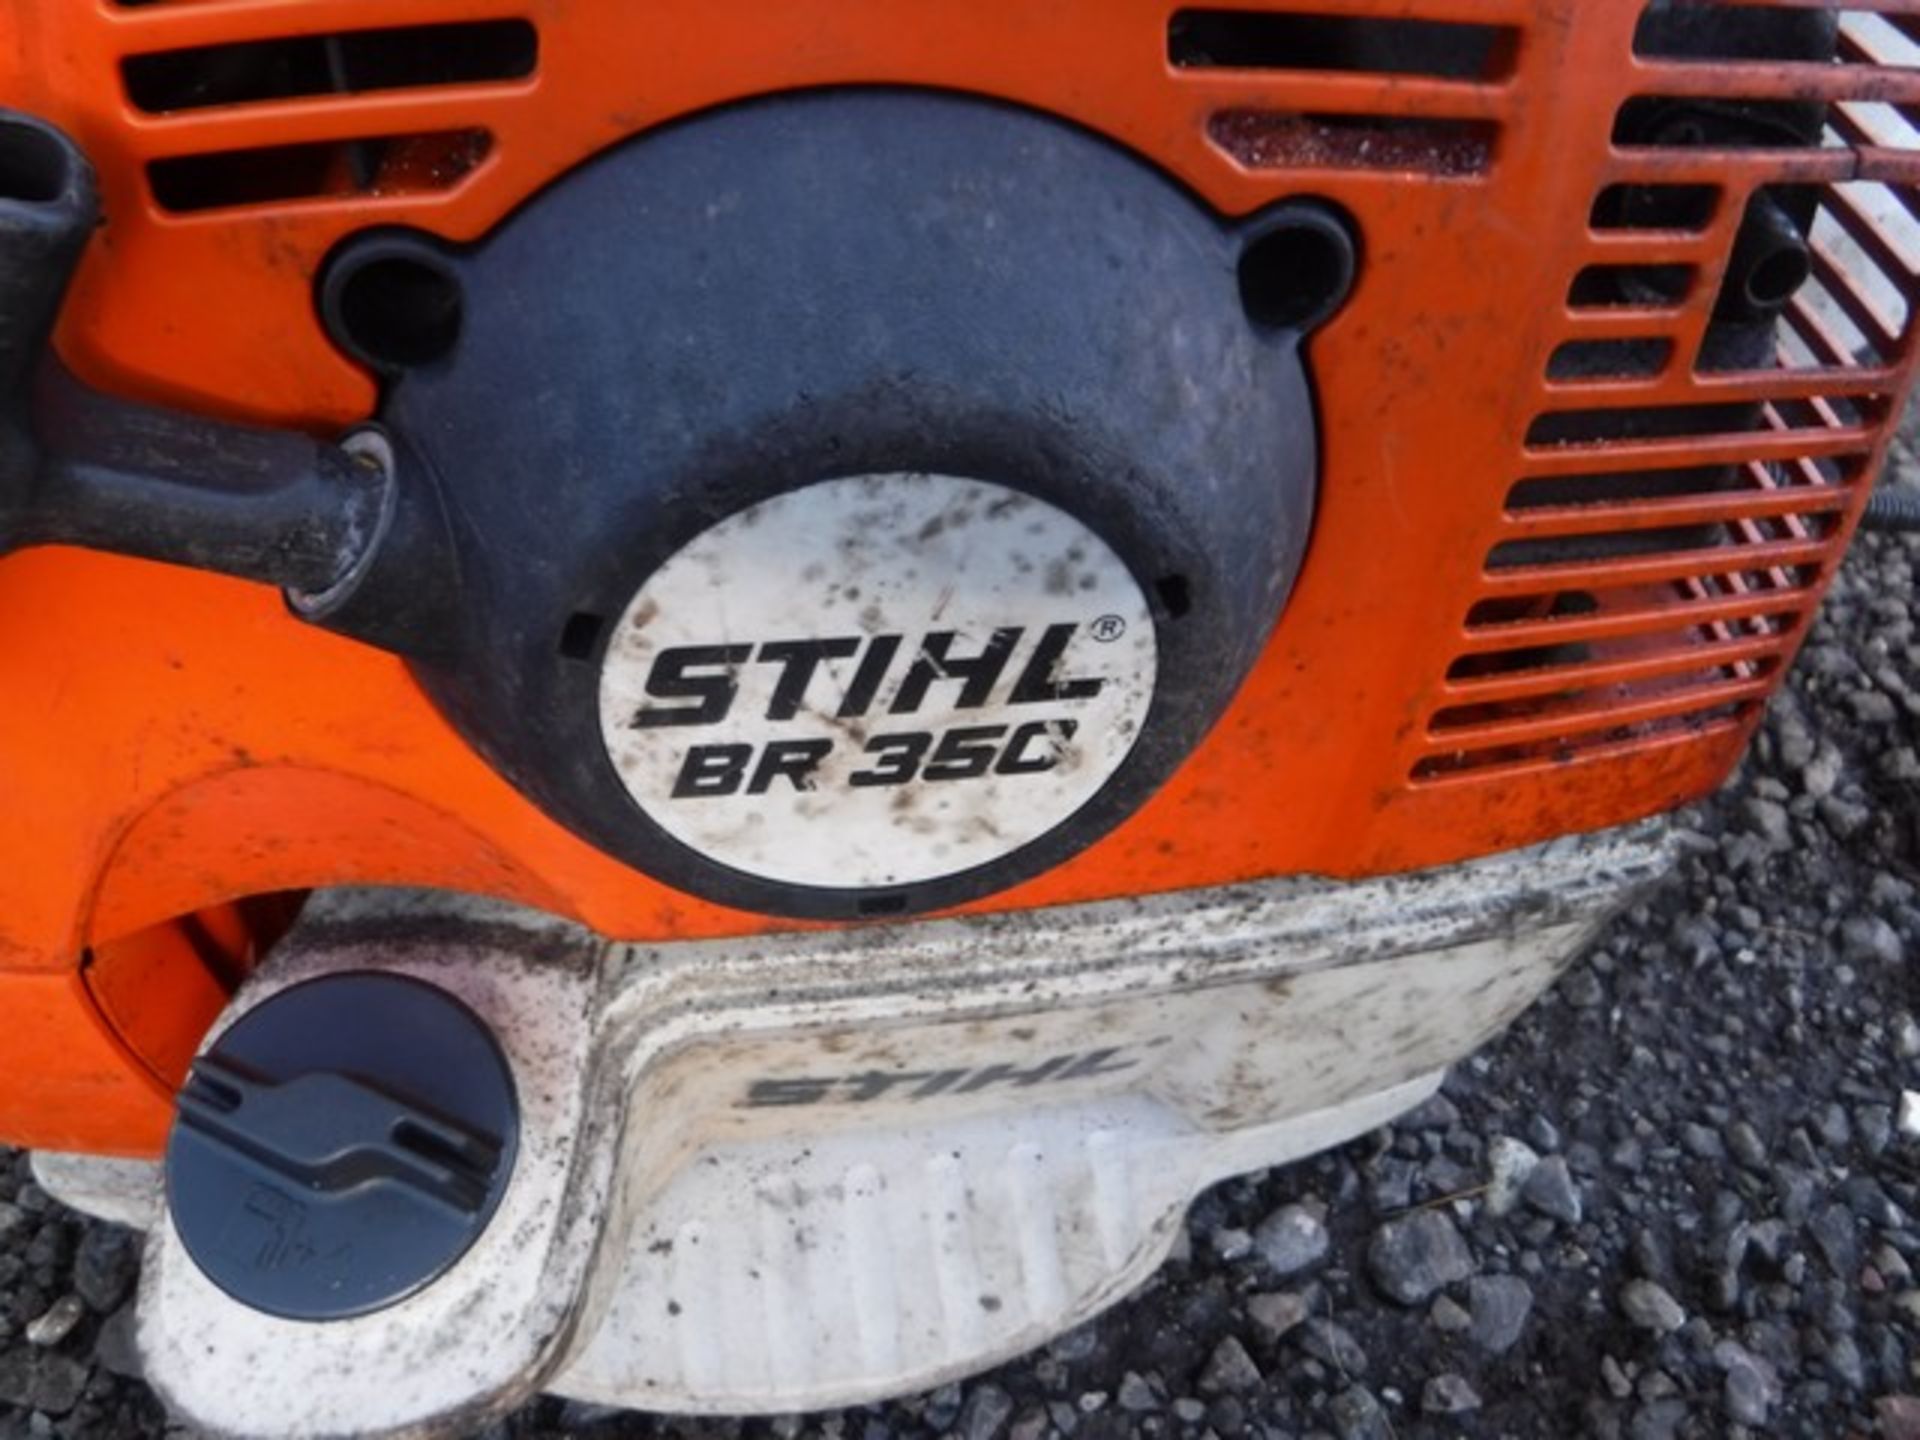 STIHL BR350 PETROL LEAFBLOWER AND HARNESS x2 - Image 3 of 3